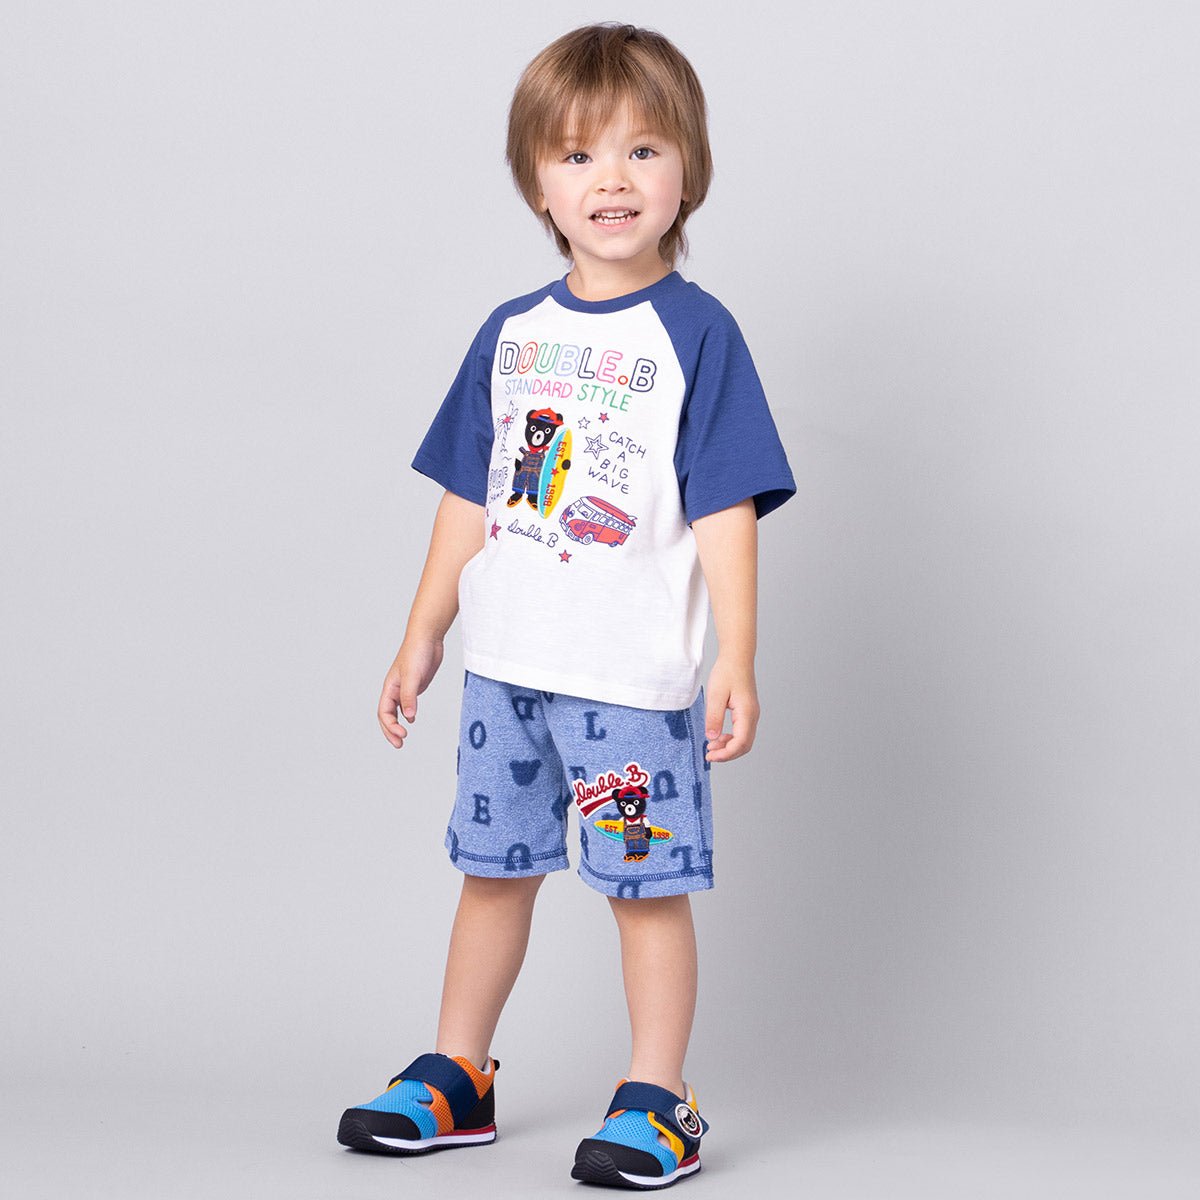 DOUBLE_B Double Russell Sneakers for Kids - Sunset Waves - MIKI HOUSE USA